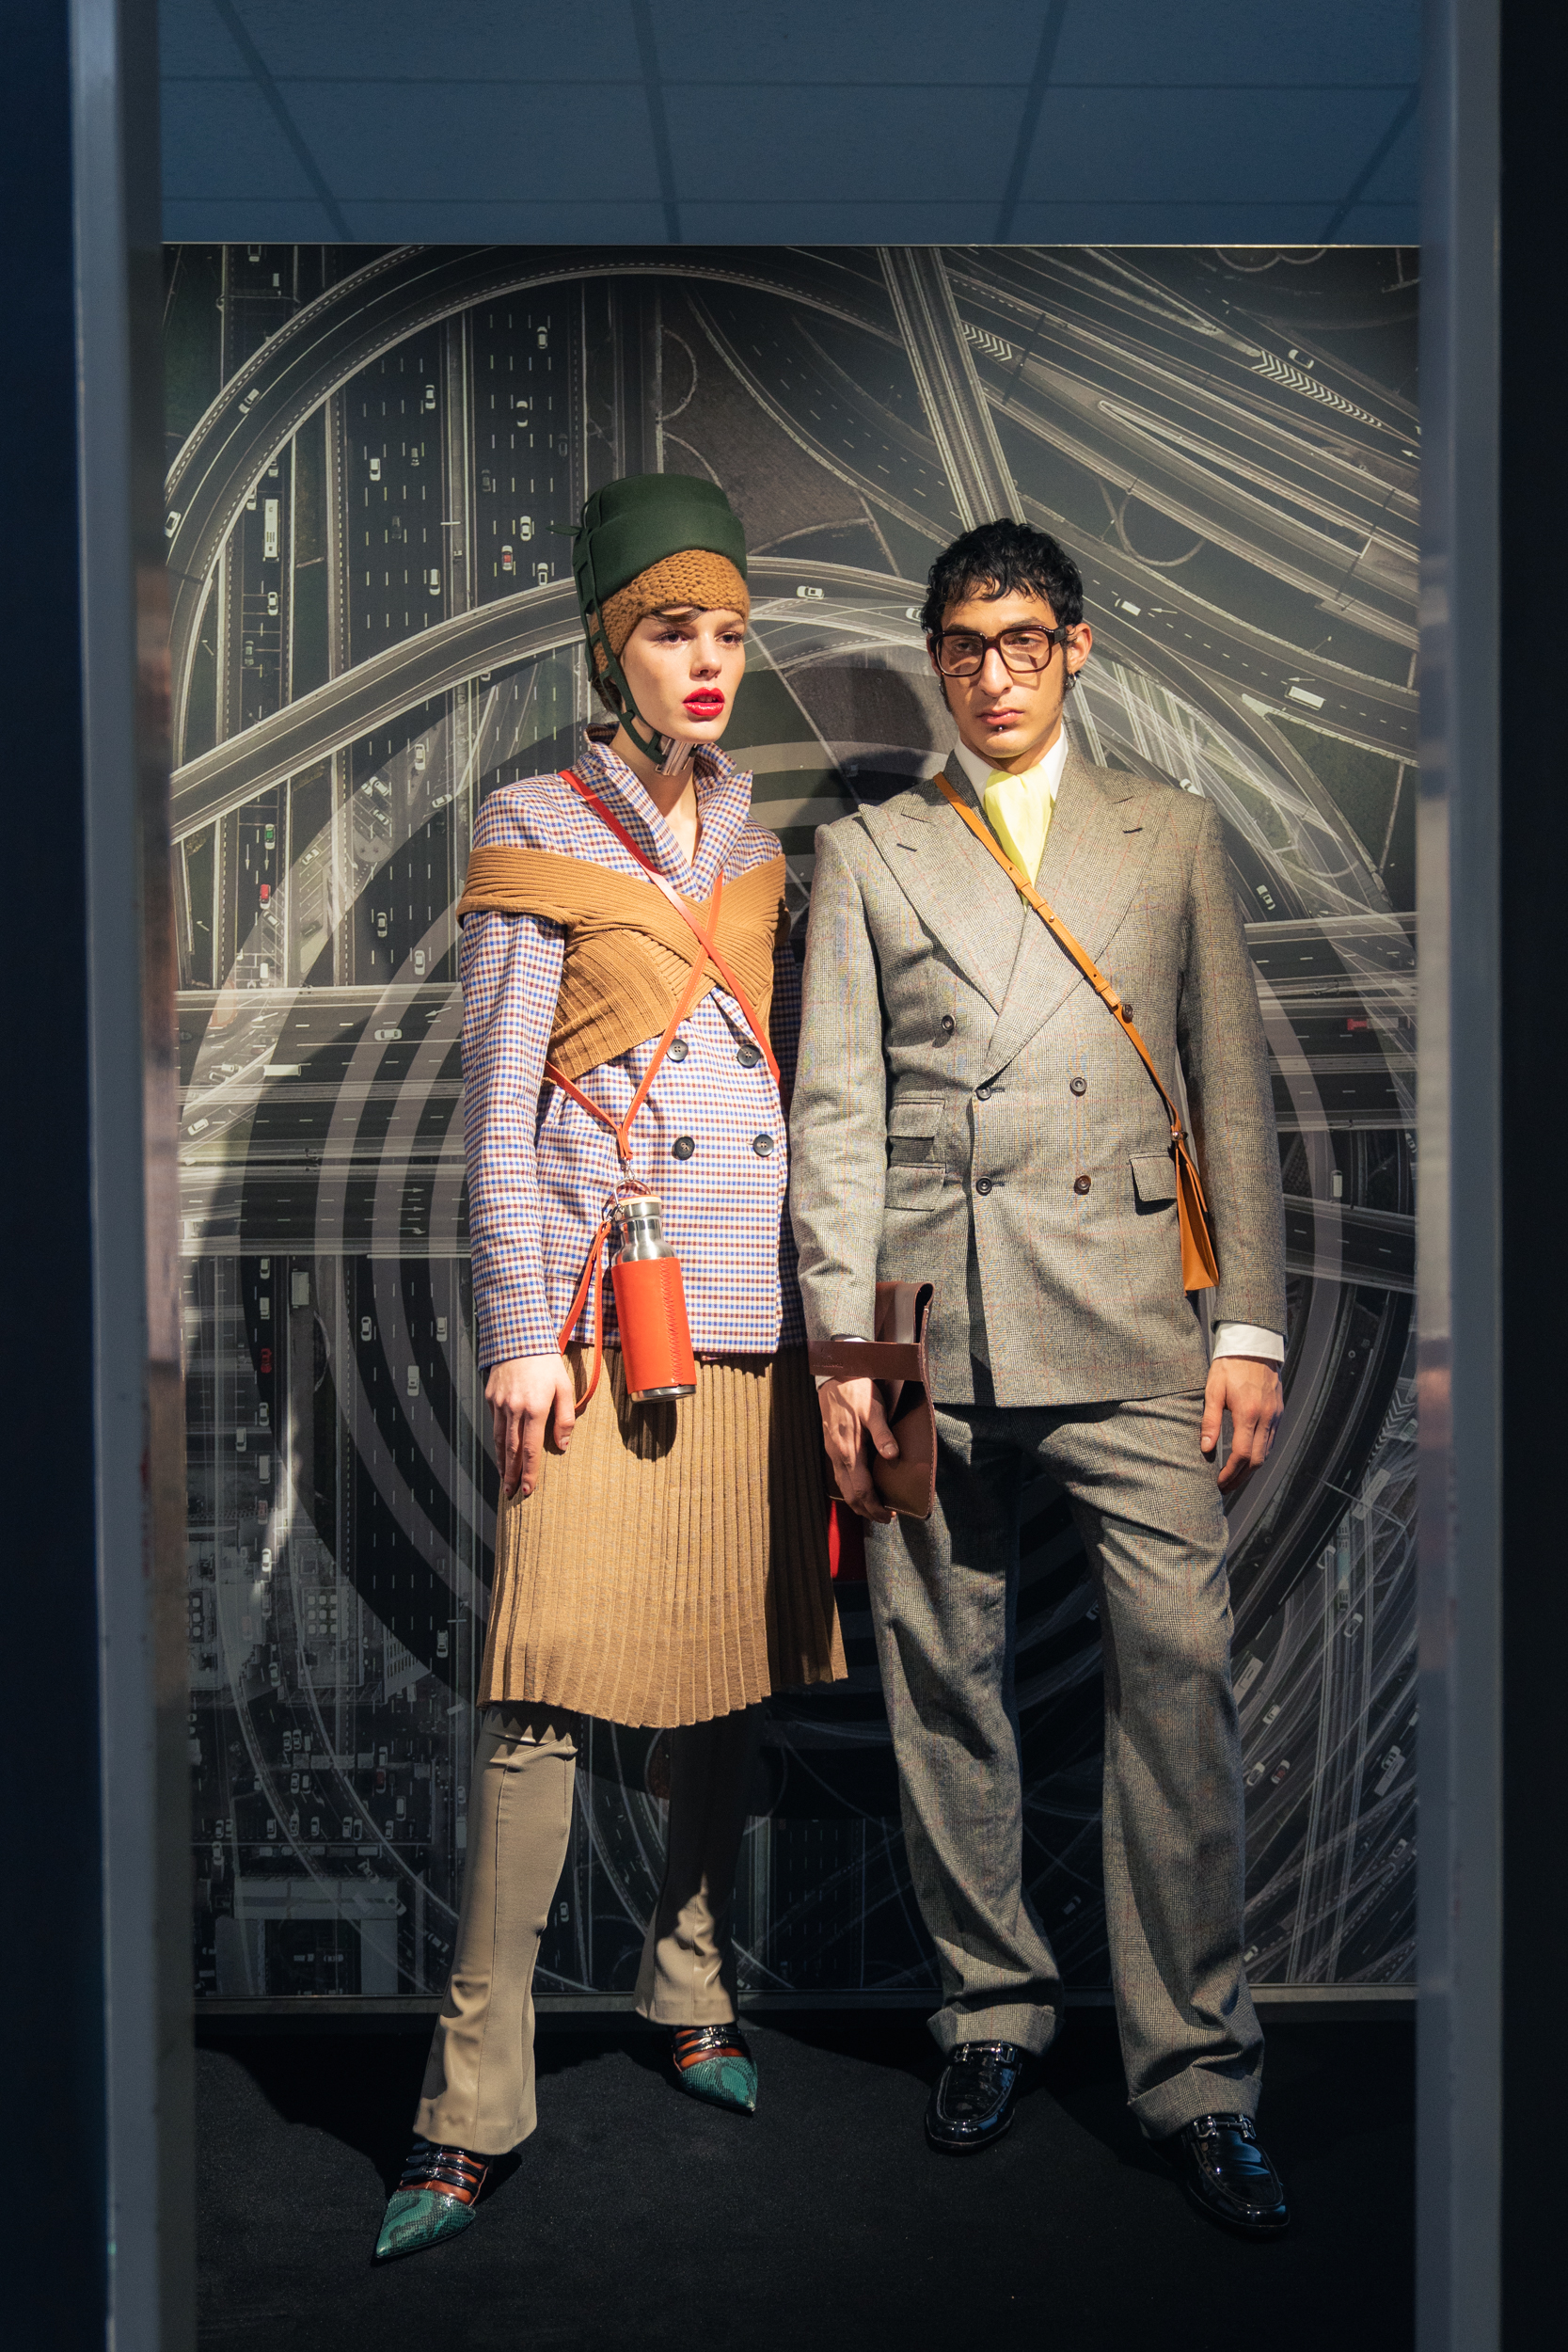 Two models wearing a blazer by Lanius, trousers & skirt by Fassbender, top by Studio Fantastique, knitted hat by Pugnat, hat by Spatz Hutdesign, bag & bottle by Trakatan, handbag by Alexandra Svendsen and shoes Miu Miu at Nightboutique Archive as well as a suit, handkerchief & collar by Maximilian Mogg, shirt by G-Star Raw, clutch by Agnes Nordenholz, crossbody bag by Alinaschuerfeld, glasses by Andy Wolf and shoes by Salvatore Ferragamo Vintage at Neonyt Installation